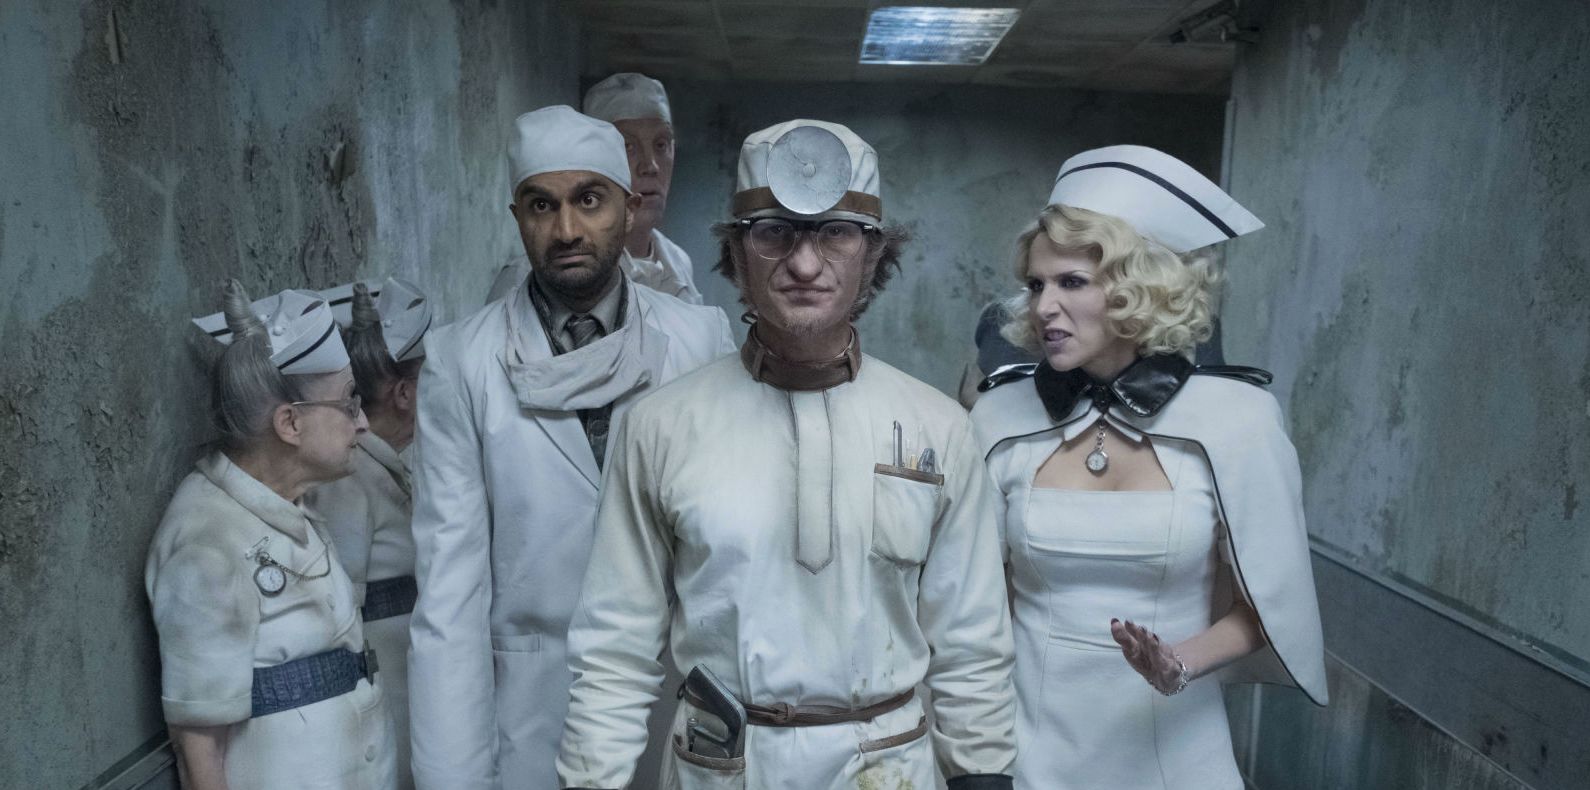 A Series of Unfortunate Events Season 2 Cast & Character Guide